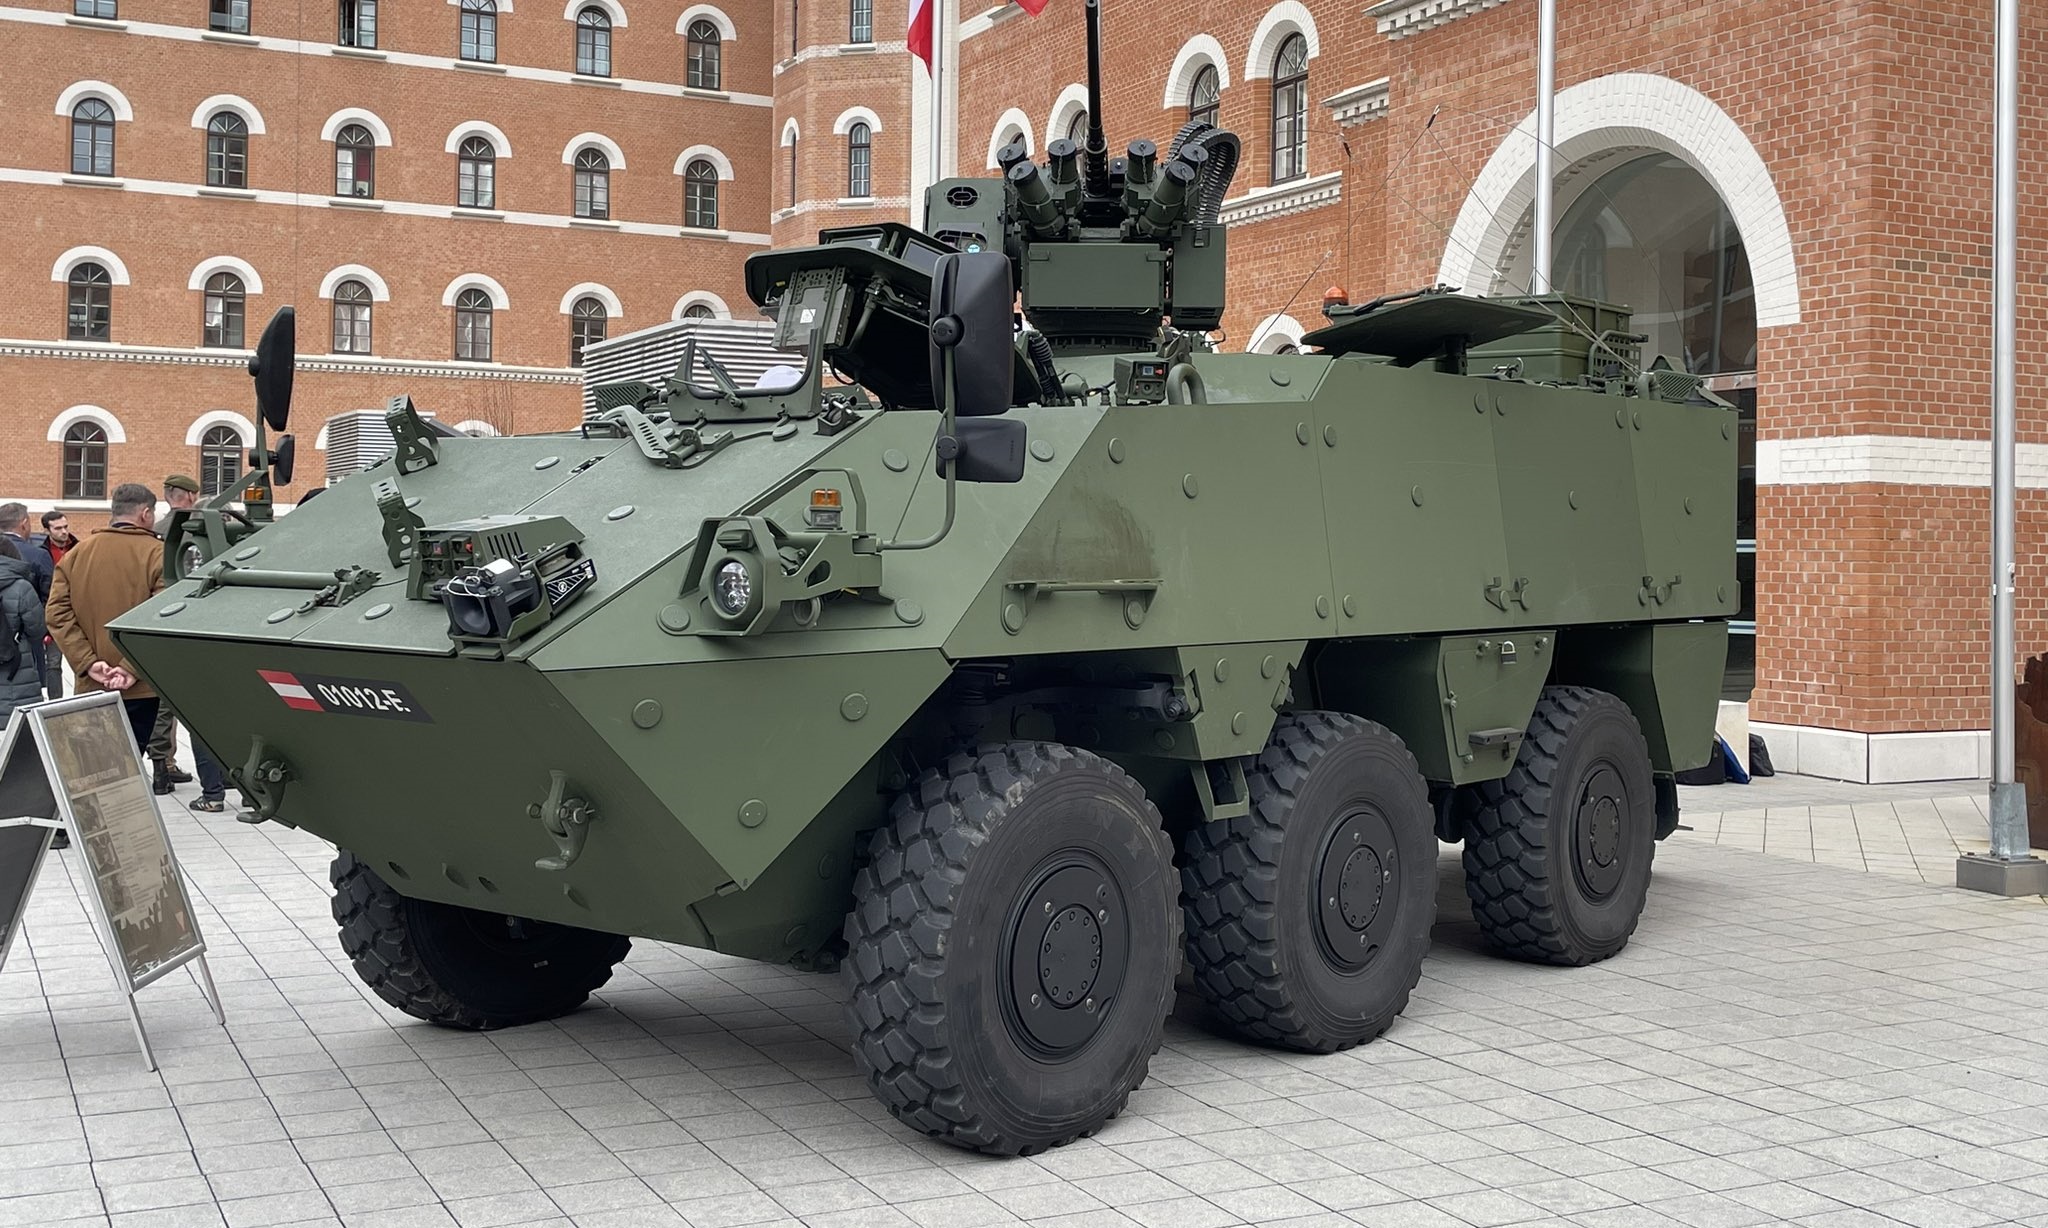 The Pandur EVO is an improved modular all-wheel-drive version of the Pandur 6x6 APC wheeled armoured vehicle produced by GDELS.